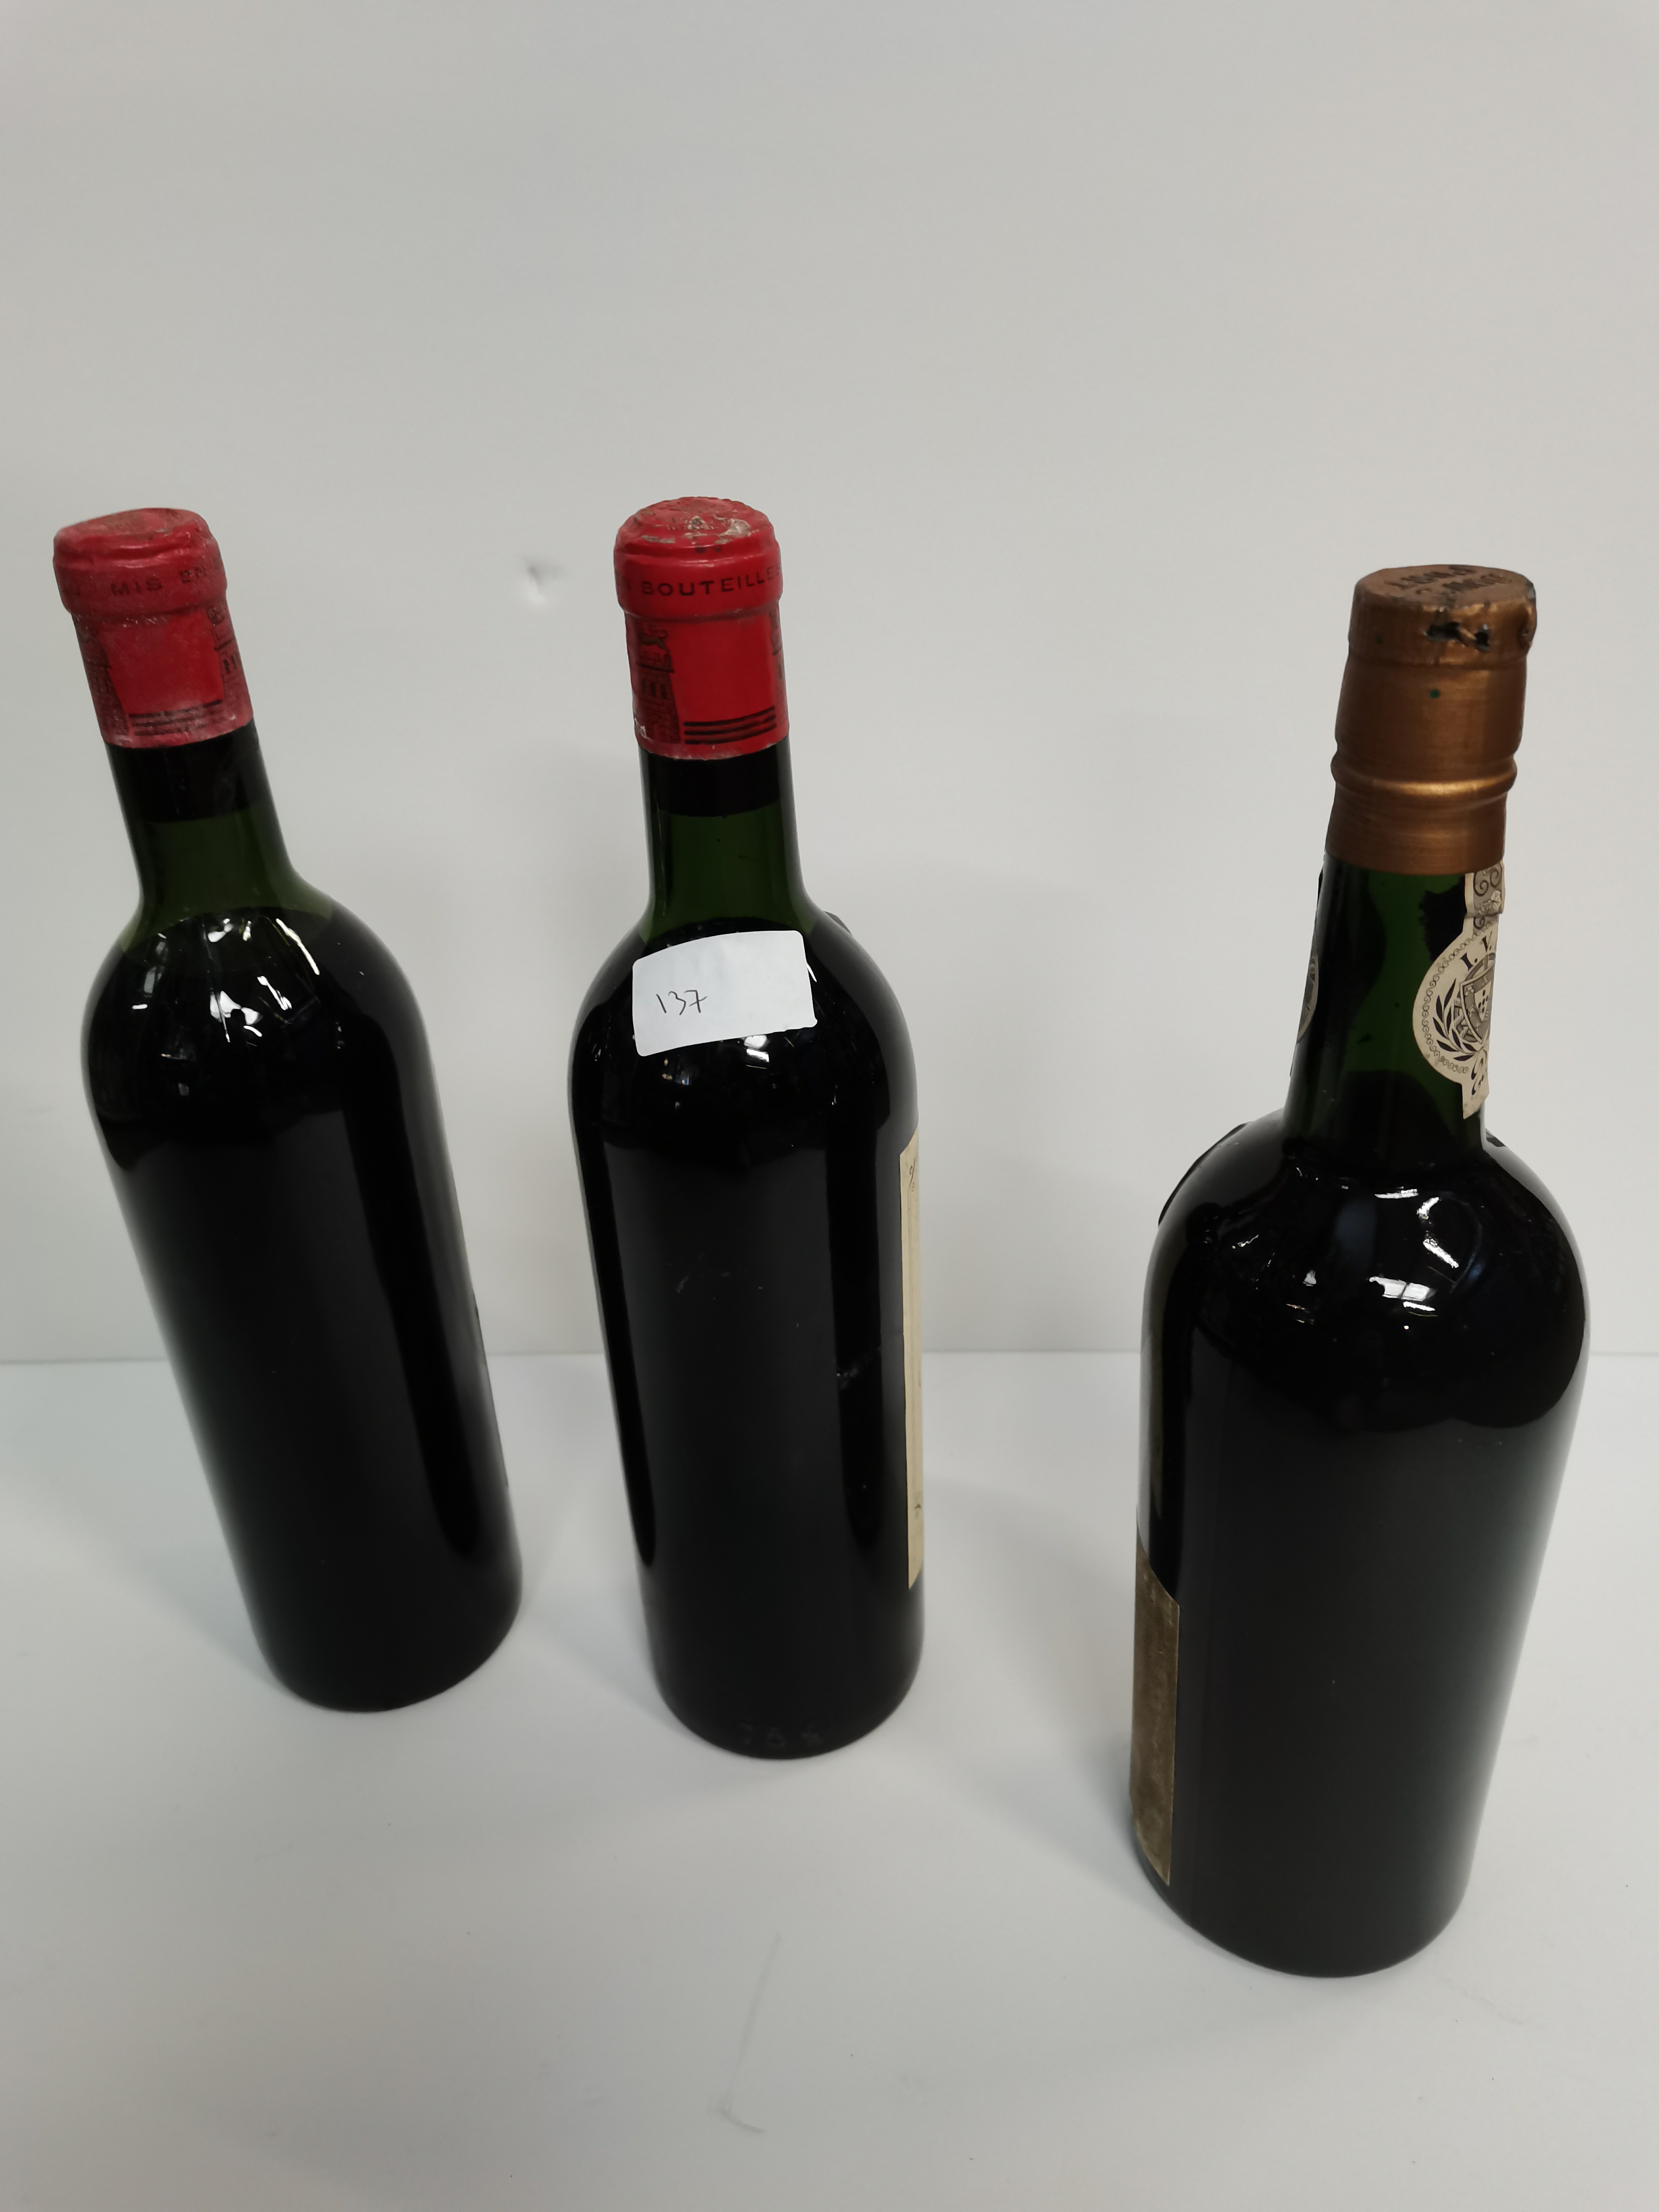 x2 bottles of Grand vin de Chateau Latour 1958 and a bottle of Dows port - Image 9 of 12